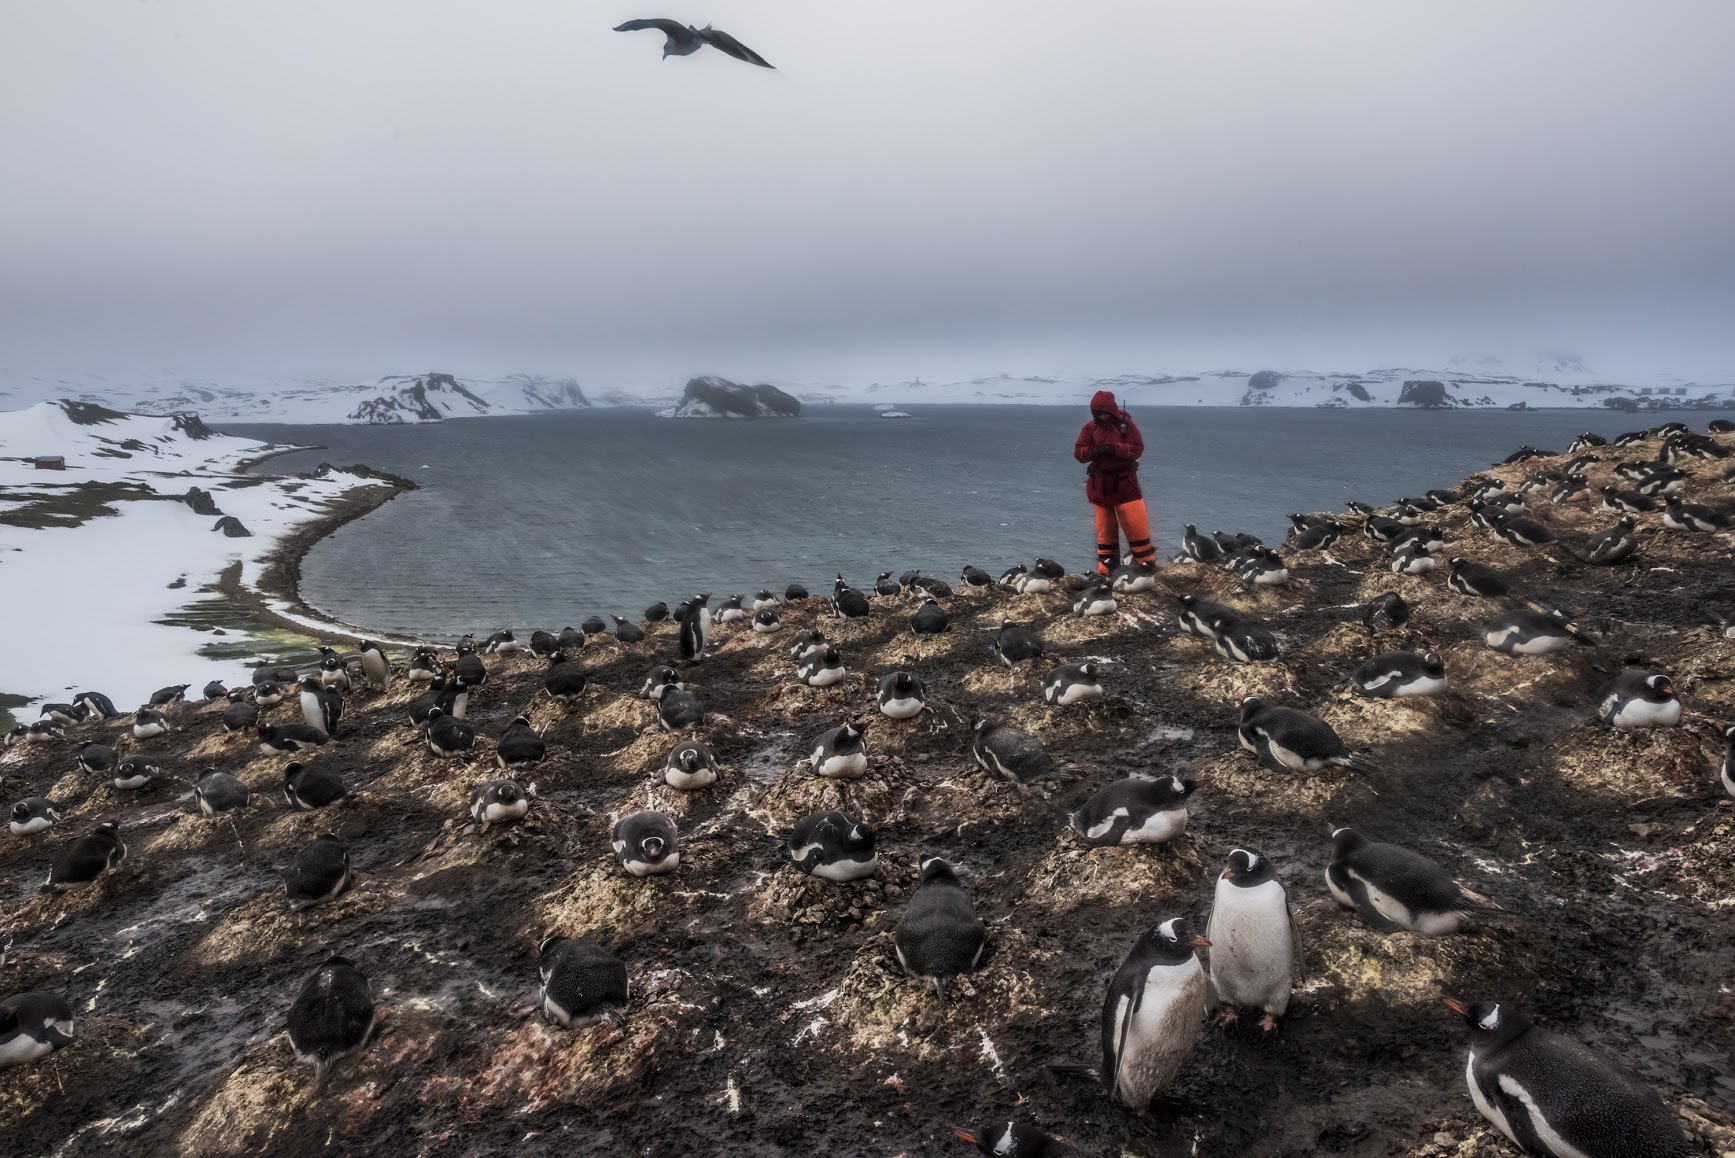 6. ANTARCTICA - DECEMBER 07, 2015: A Member of a German research team from the Friedrich Schiller University Jena, counts the number of penguin species and pairs as part of ongoing research on bird and penguin species in Antarctica, on 7th of December, 2015 on Ardley Island in the Fildes Peninsula on King George Island, Antarctica. Yardley Island has been designated an Antarctic Specially Protected Area (ASPA 150) because of the importance of its seabird and penguin colonies. More than a century has passed since explorers raced to plant their flags at the bottom of the world. But today, an array of countries are rushing to assert greater influence in Antarctica. Russia built the continent’s first Orthodox church, pictured here, on a glacier-filled island with fjords and elephant seals. Less than an hour away by snowmobile, Chinese labourers have updated the Great Wall Station, a linchpin in China’s plan to operate 5 bases on Antarctica. And India’s futuristic new Bharathi base resembles a spaceship. The continent is supposed to be protected as a scientific preserve for decades to come, but many are looking toward the day those protective treaties expire — and exploring the strategic and commercial opportunities that exist right now.